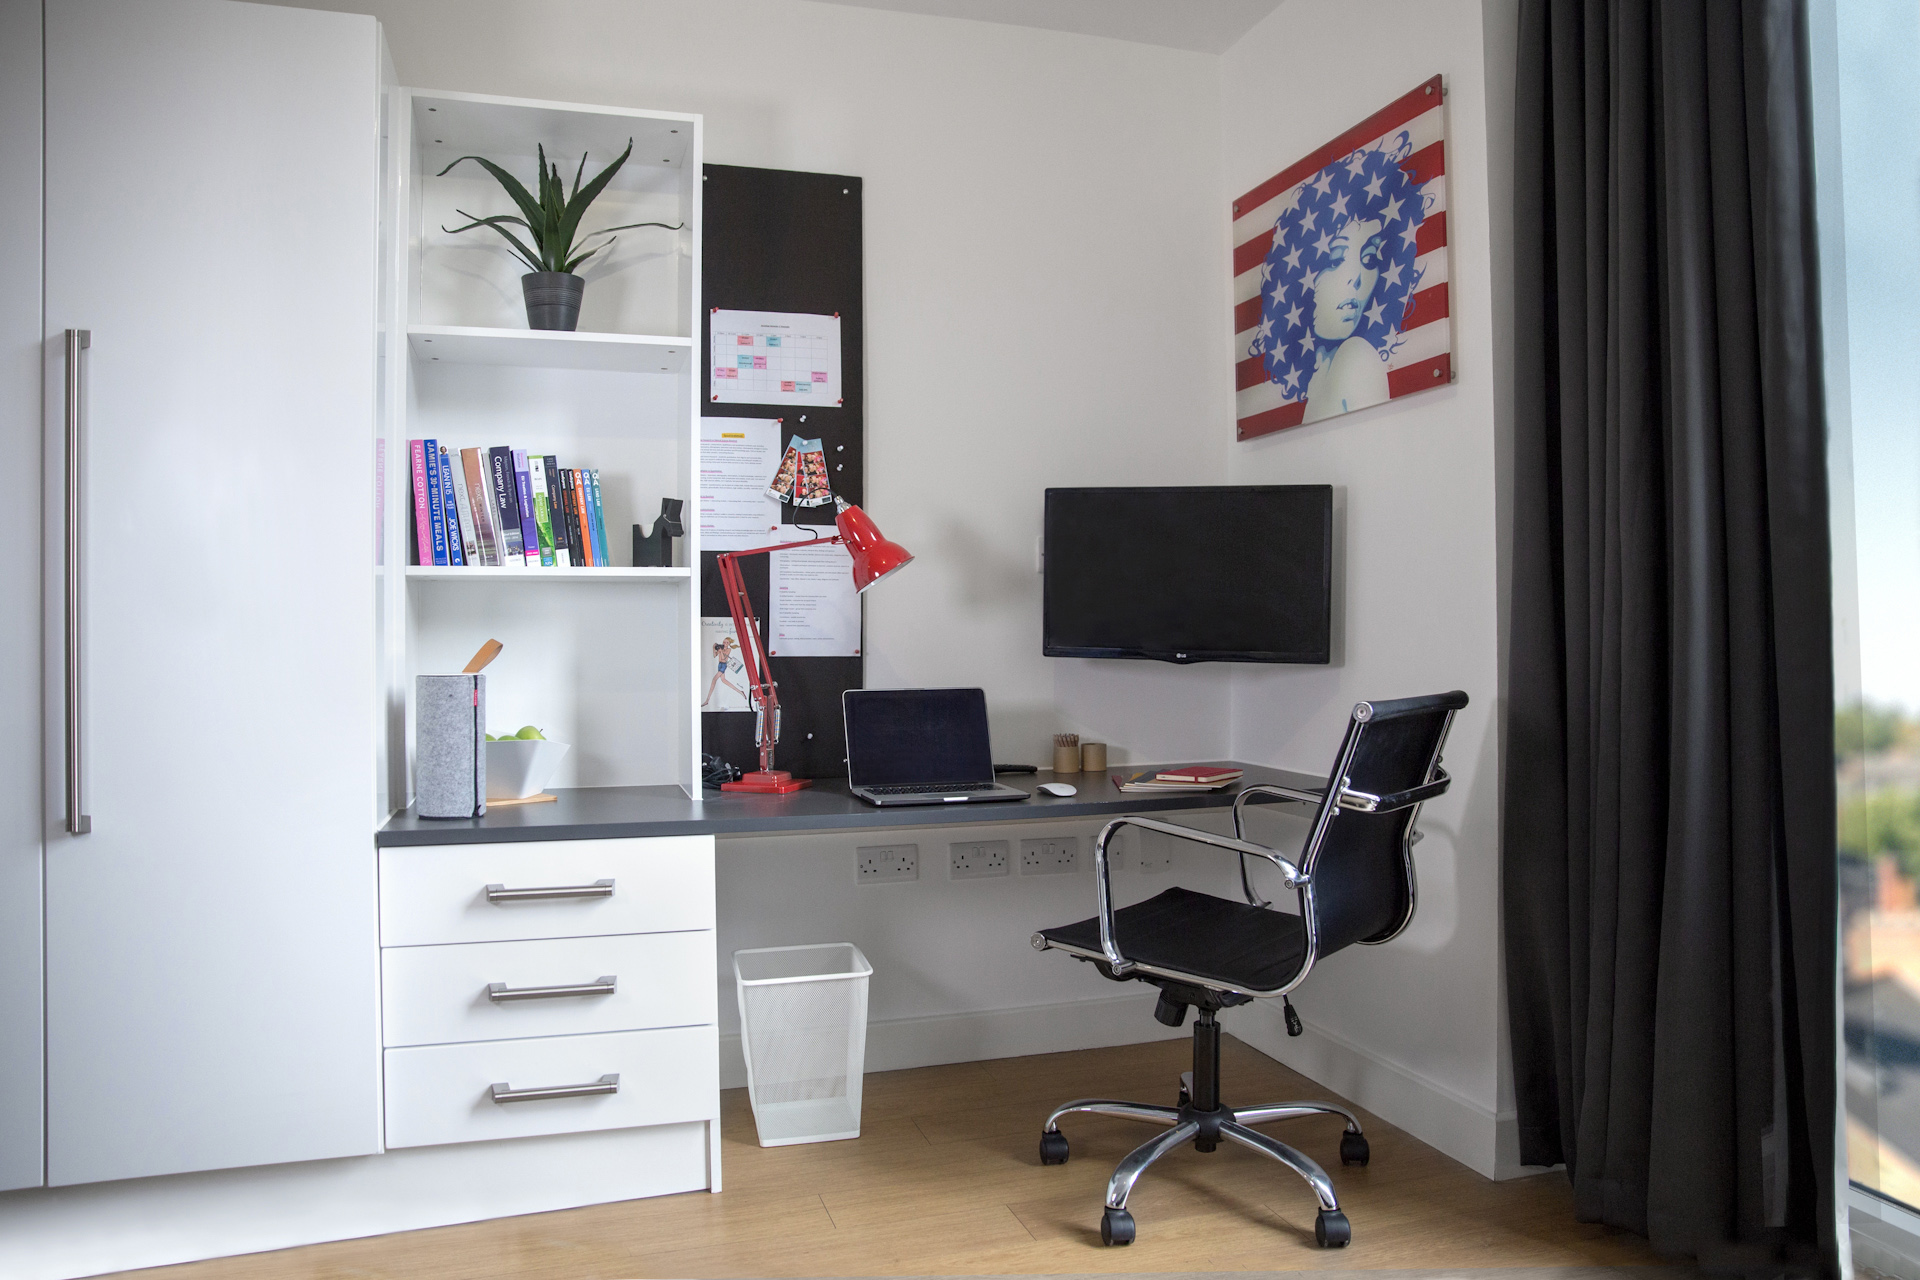 Workspace at CODE Student Accommodation Leicester